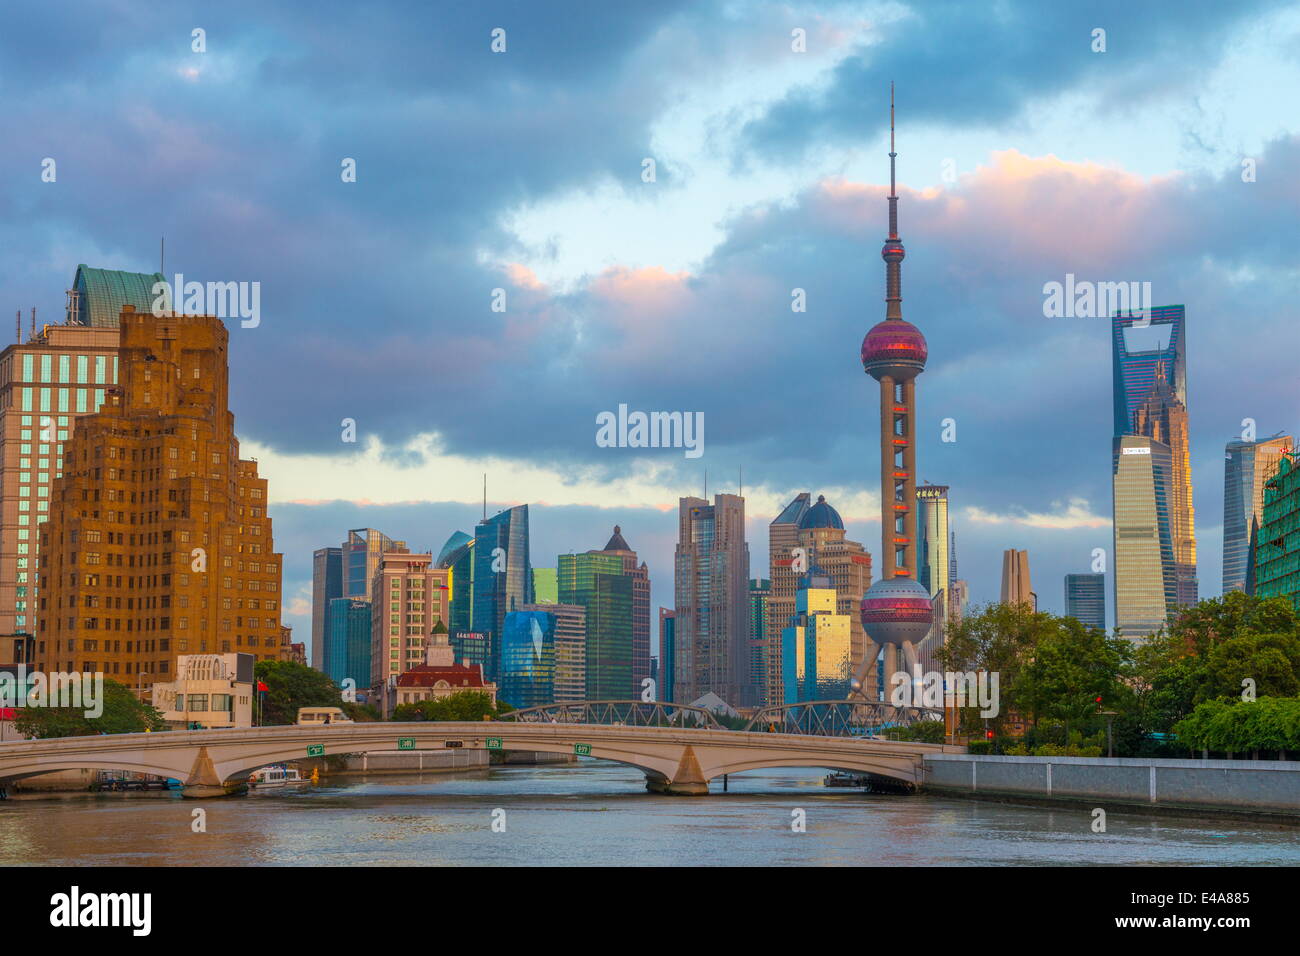 Pudong Financial District skyline, including Oriental Pearl Tower, and bridge over Wusong River (Suzhou Creek), Shanghai, China Stock Photo